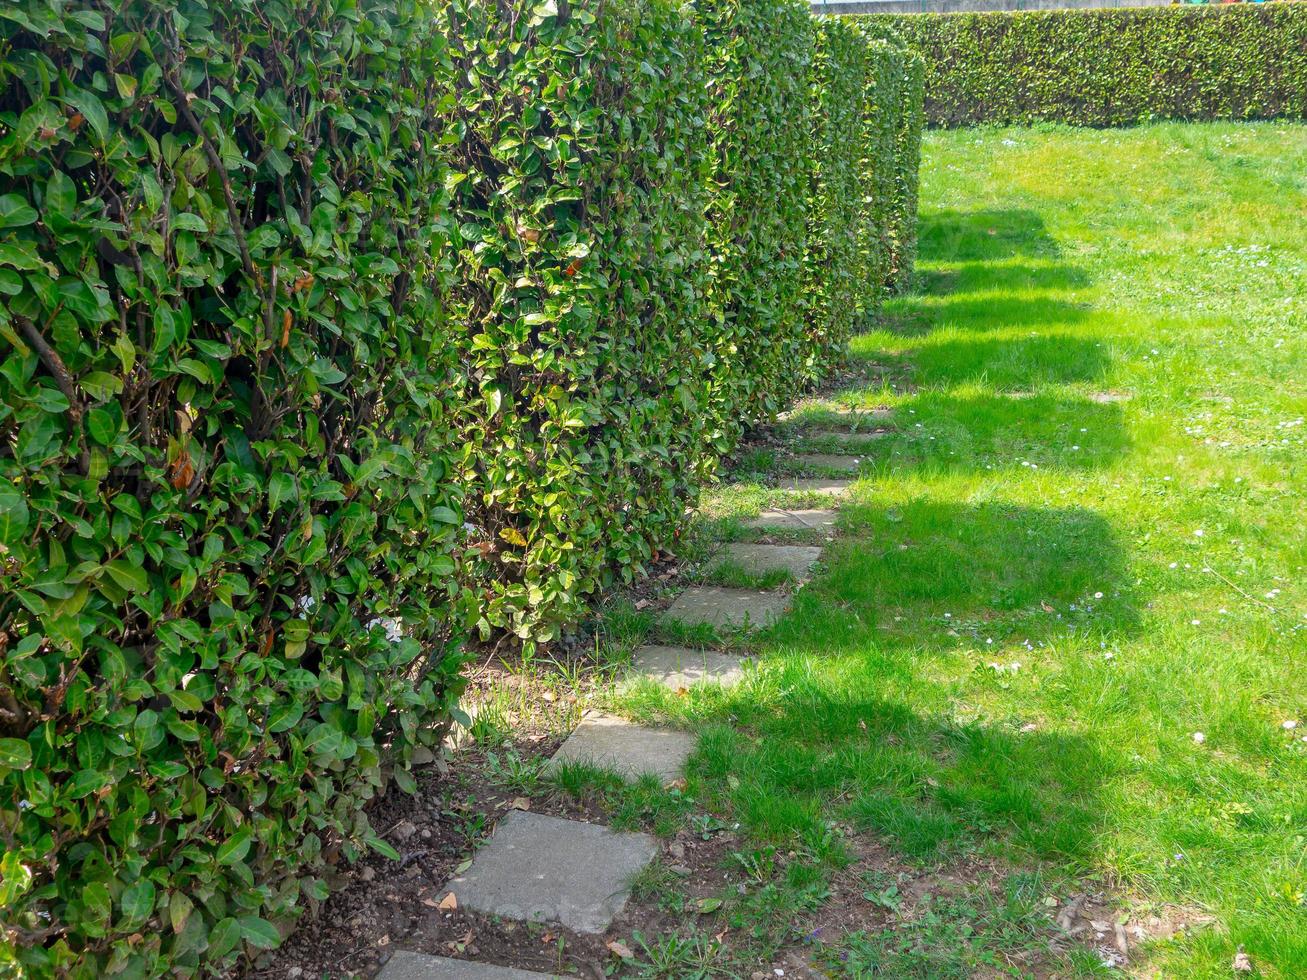 Shadows of square-shaped shrubs standing in a row photo